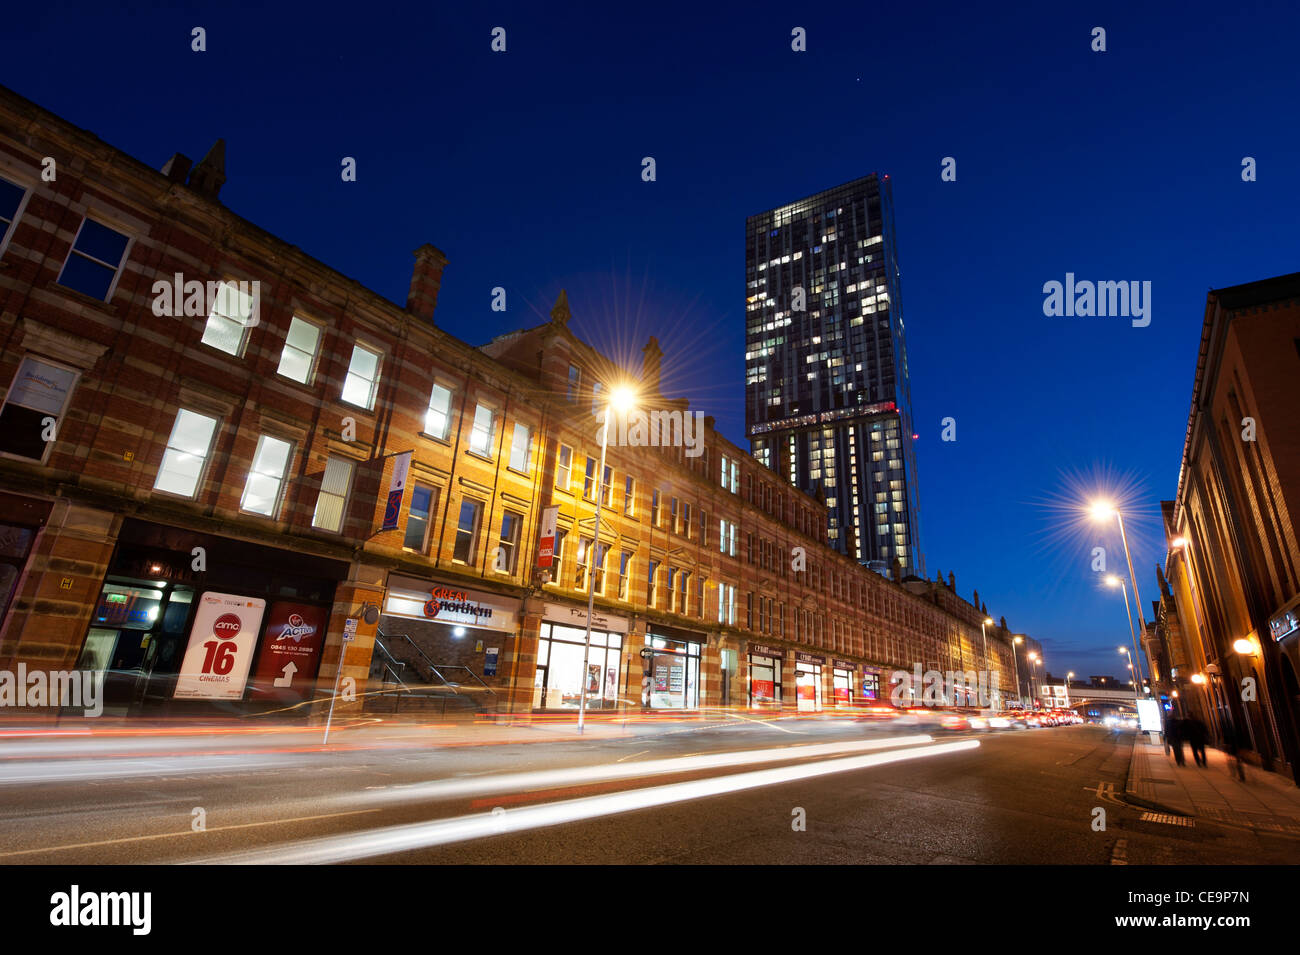 A shot of Deansgate looking towards Beetham Tower at late evening night sky in Manchester, UK. Stock Photo